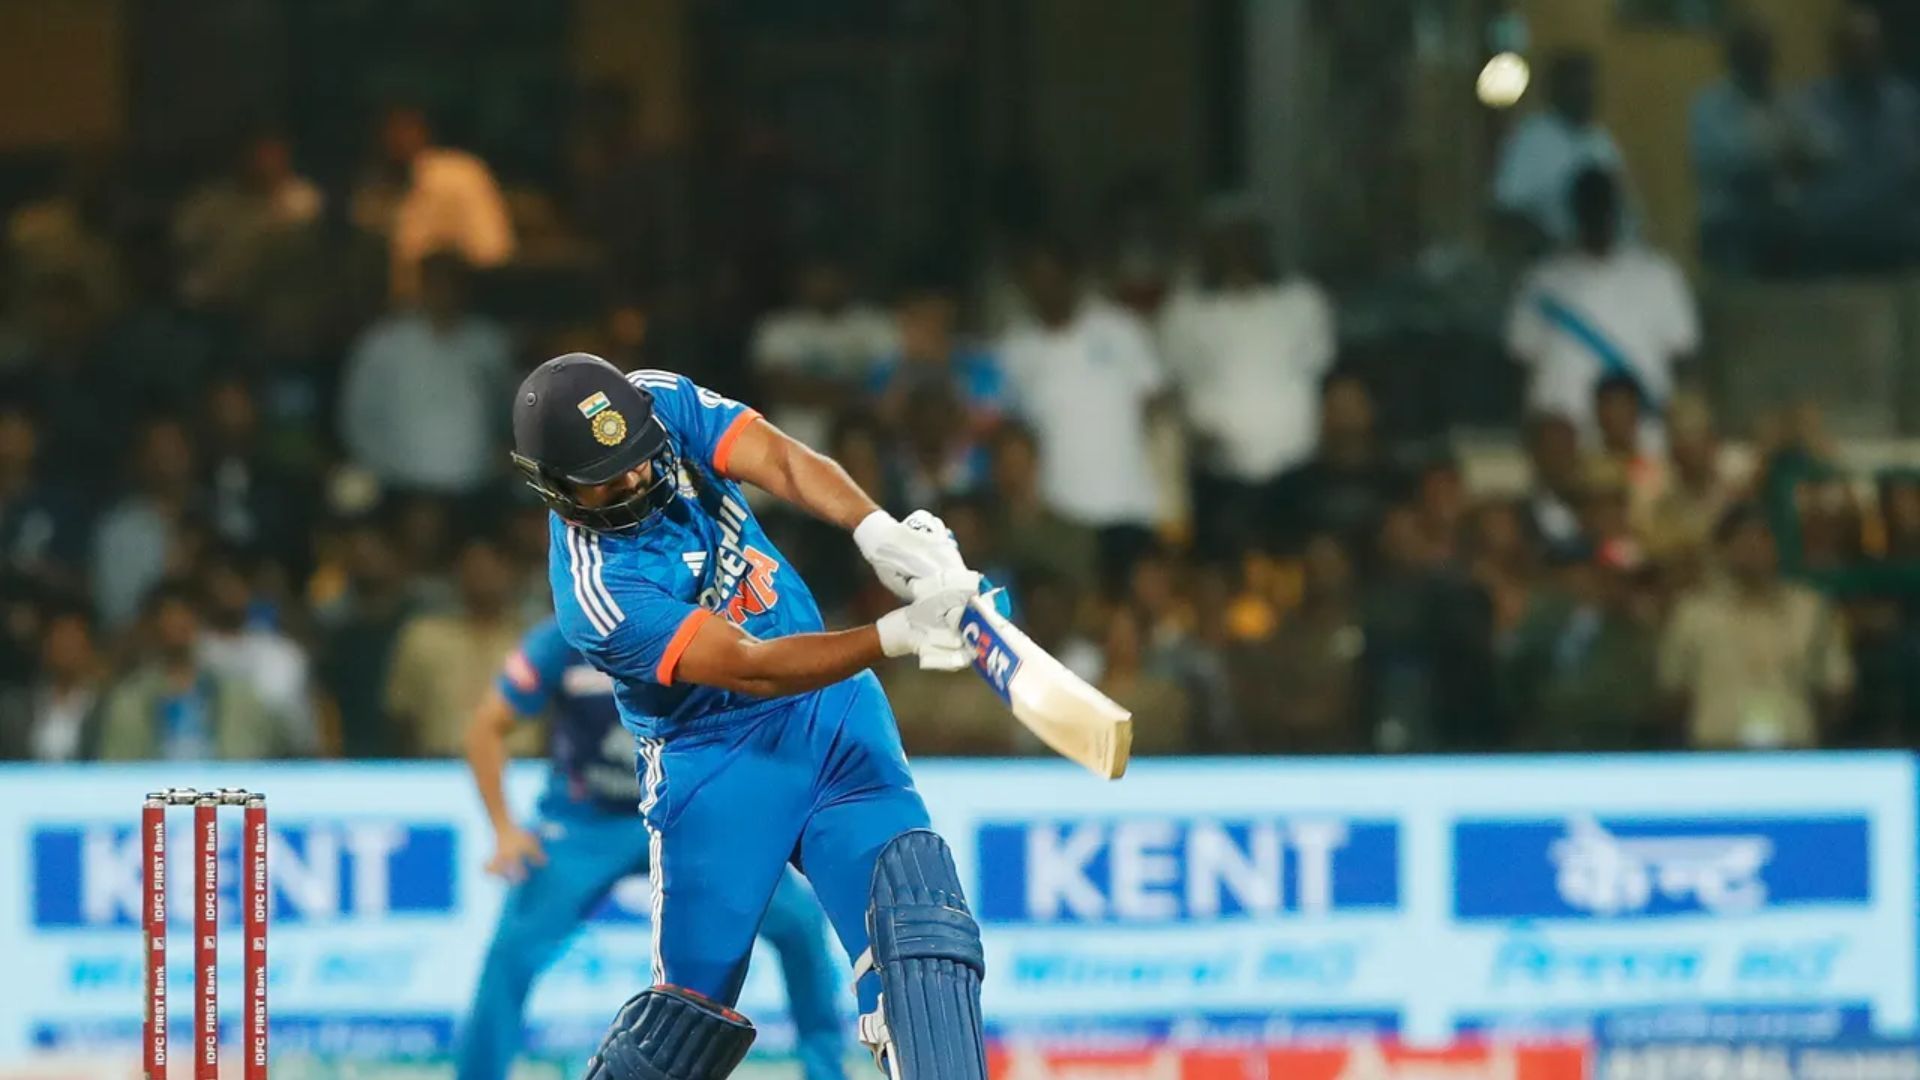 Rohit Sharma scored a scintillating T20I hundred in Bengaluru against Afghanistan